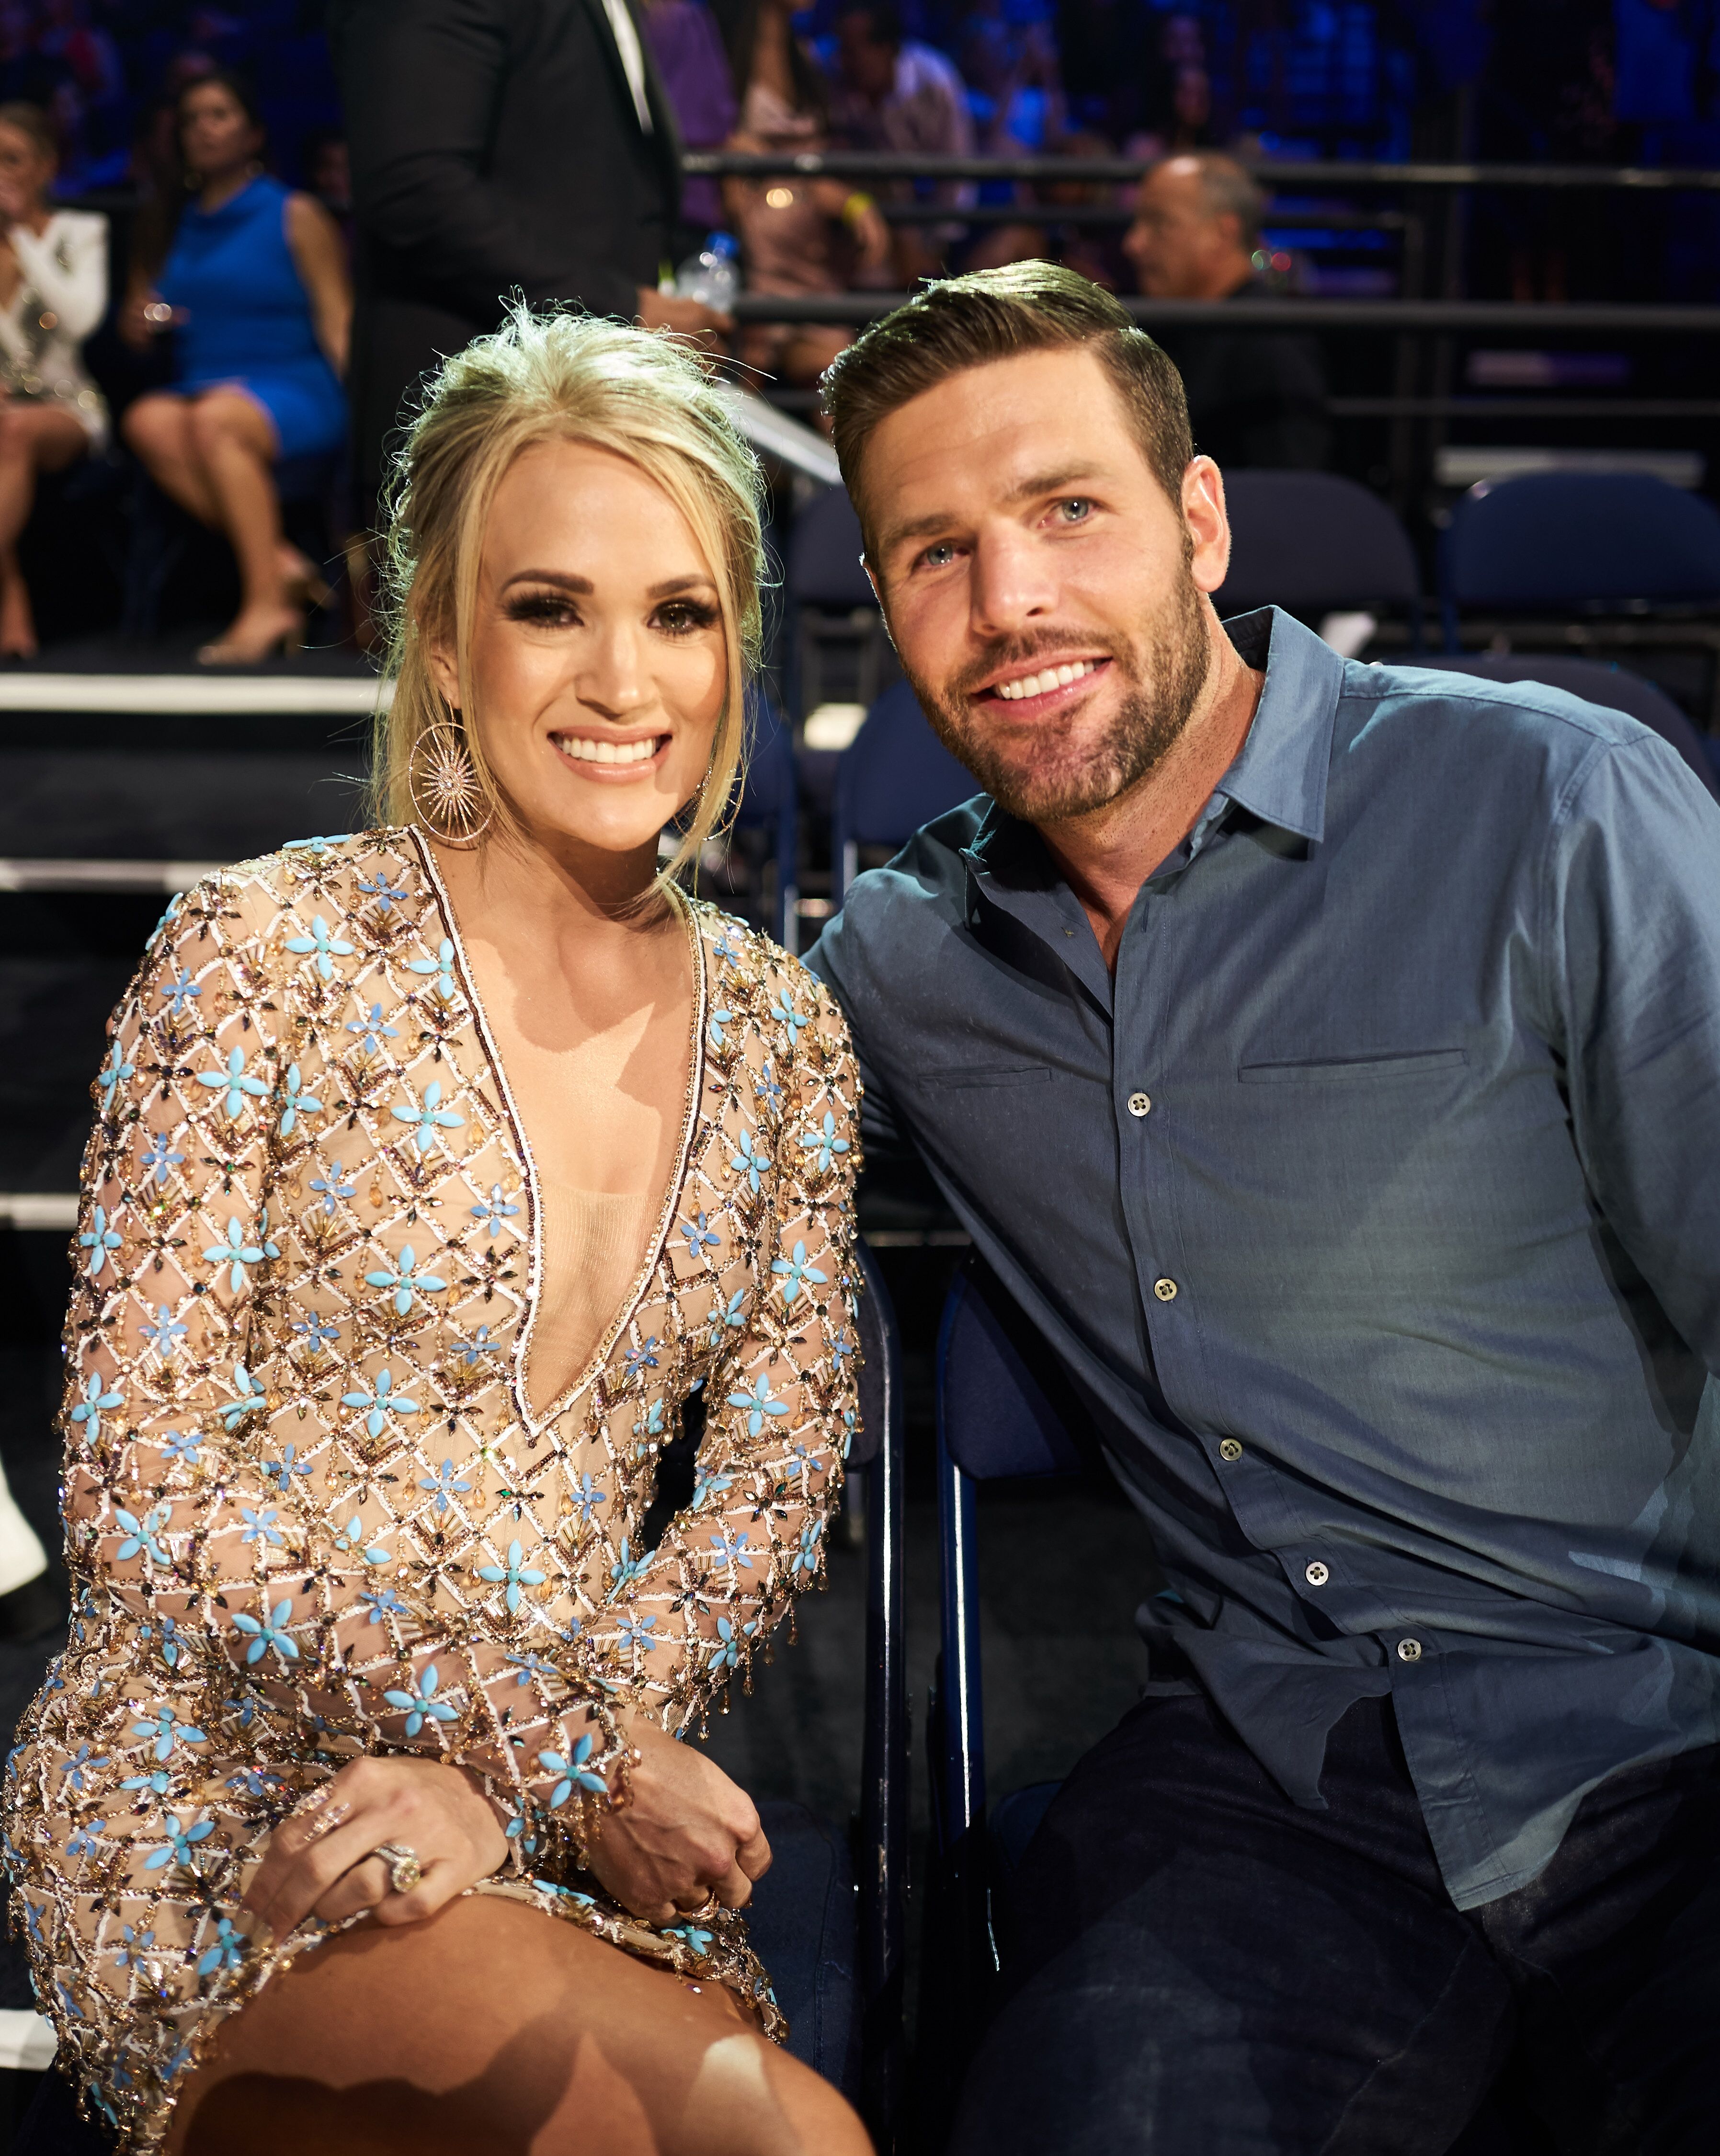 Carrie Underwood and Mike Fisher attend the CMT Music Awards. | Source: Getty Images